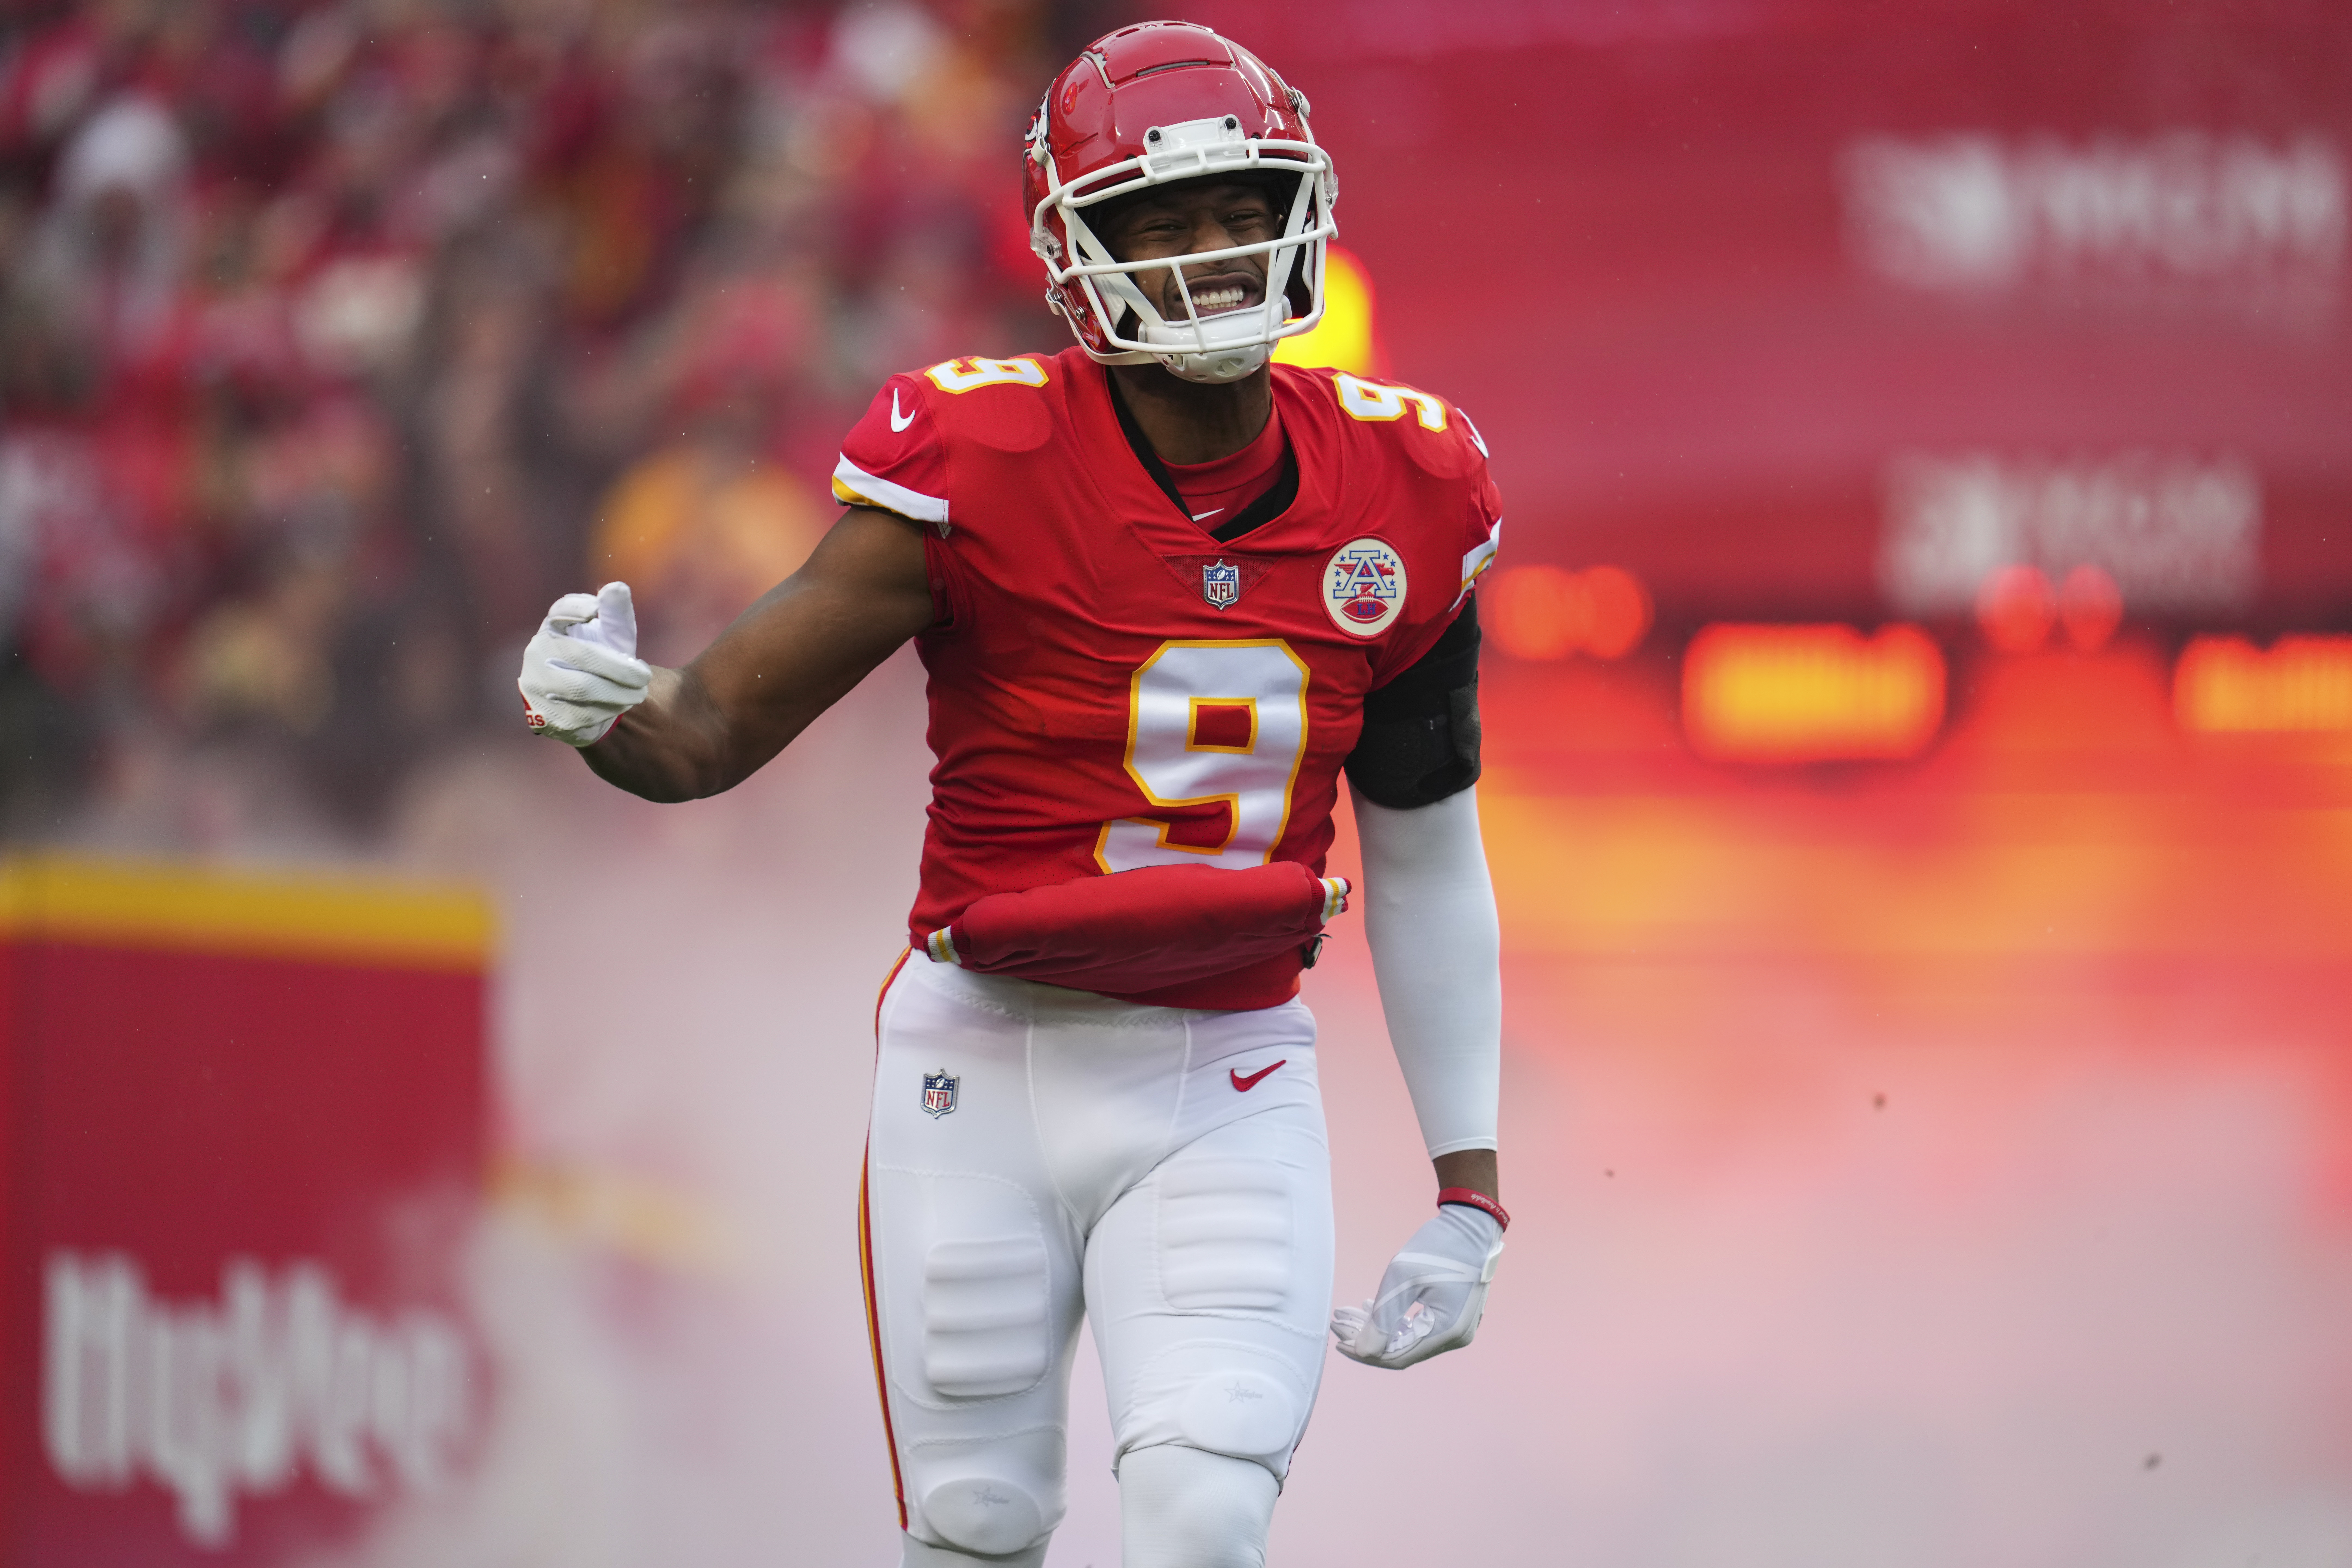 JuJu Smith-Schuster #9 of the Kansas City Chiefs runs onto the field during introductions against the Jacksonville Jaguars at GEHA Field at Arrowhead Stadium on January 21, 2023 in Kansas City, Missouri.